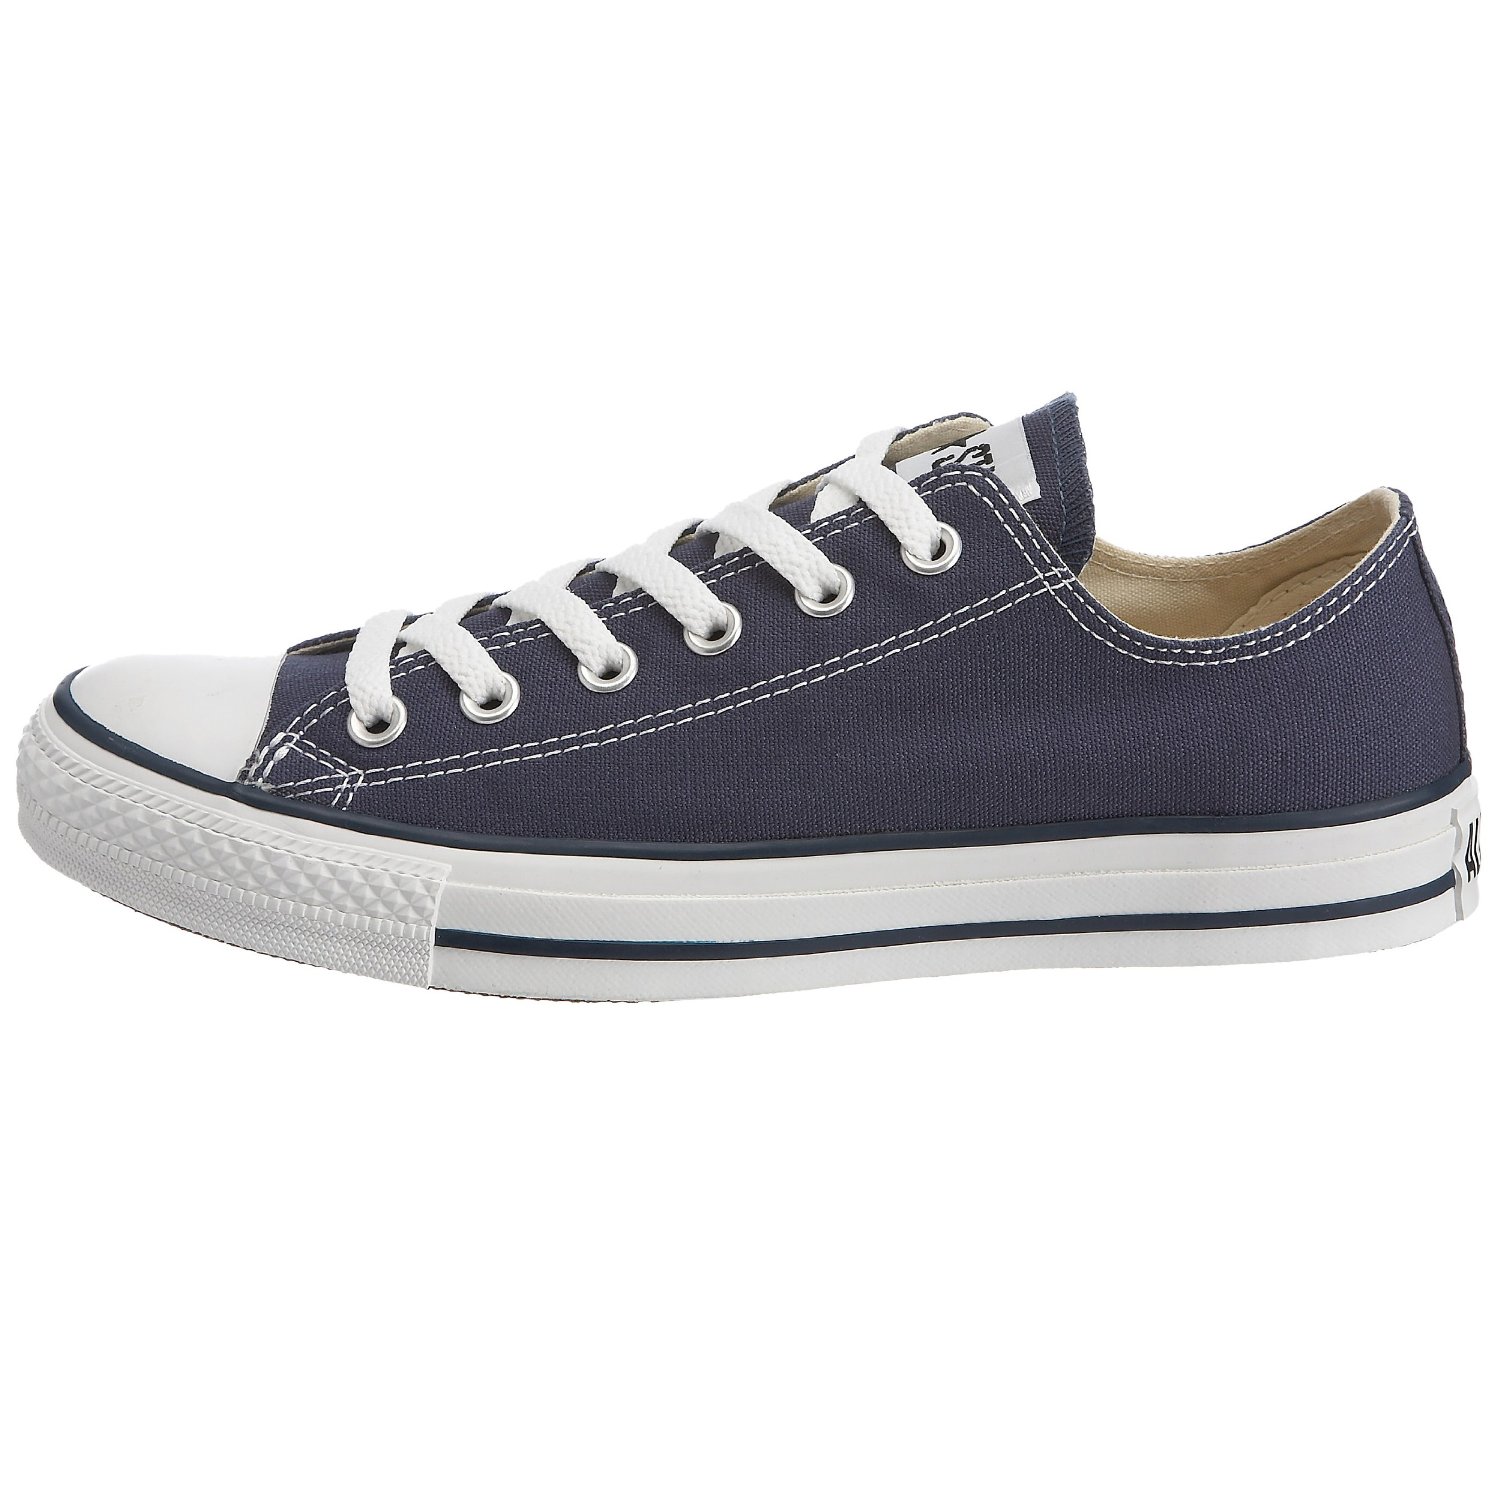 Converse Unisex Chuck low Fashion-Sneakers - image 5 of 7